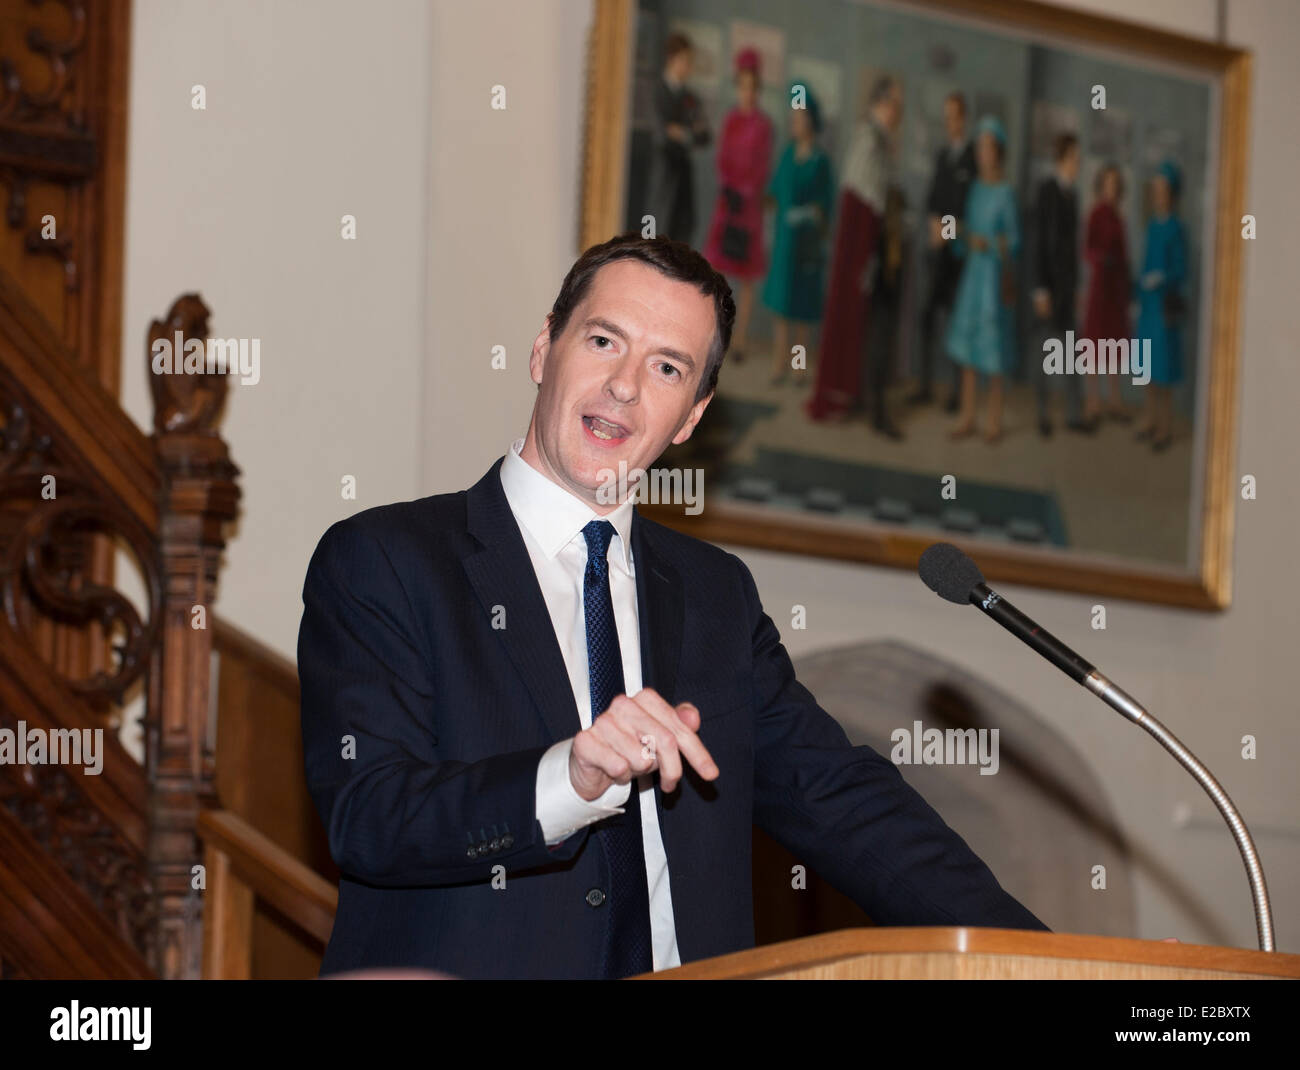 London, UK, 18th June, 2014. George Osborne Chancellor of the Exchequer gives speech at the Margaret Thatcher Conference on Liberty 18th June 2014 Guildhall London uk Credit:  Prixnews/Alamy Live News Stock Photo